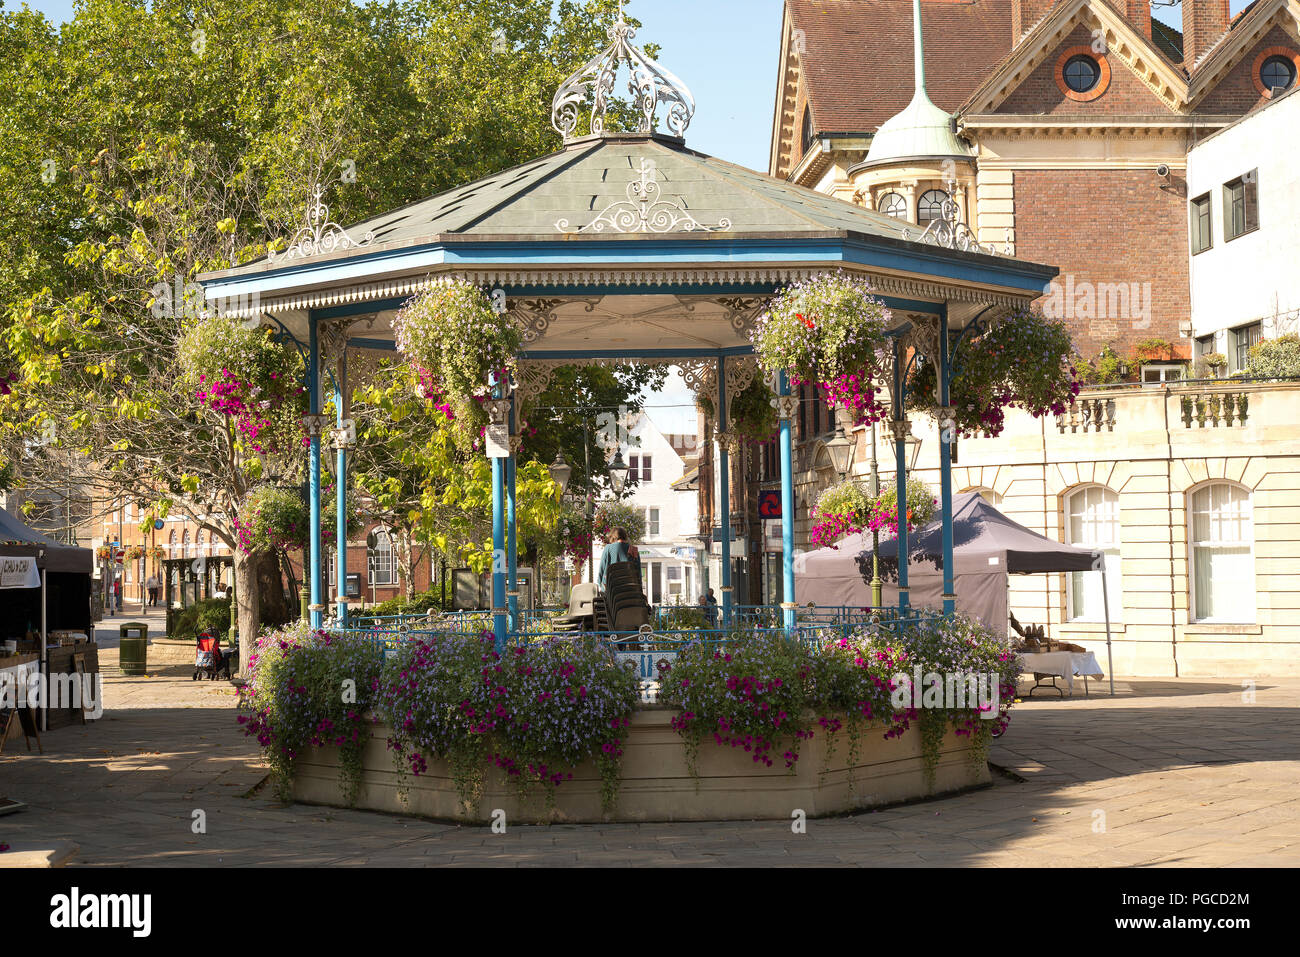 The floral displays around the bandstand in the Carfax of Horsham town center. Summer flowers in hanging baskets. Stock Photo